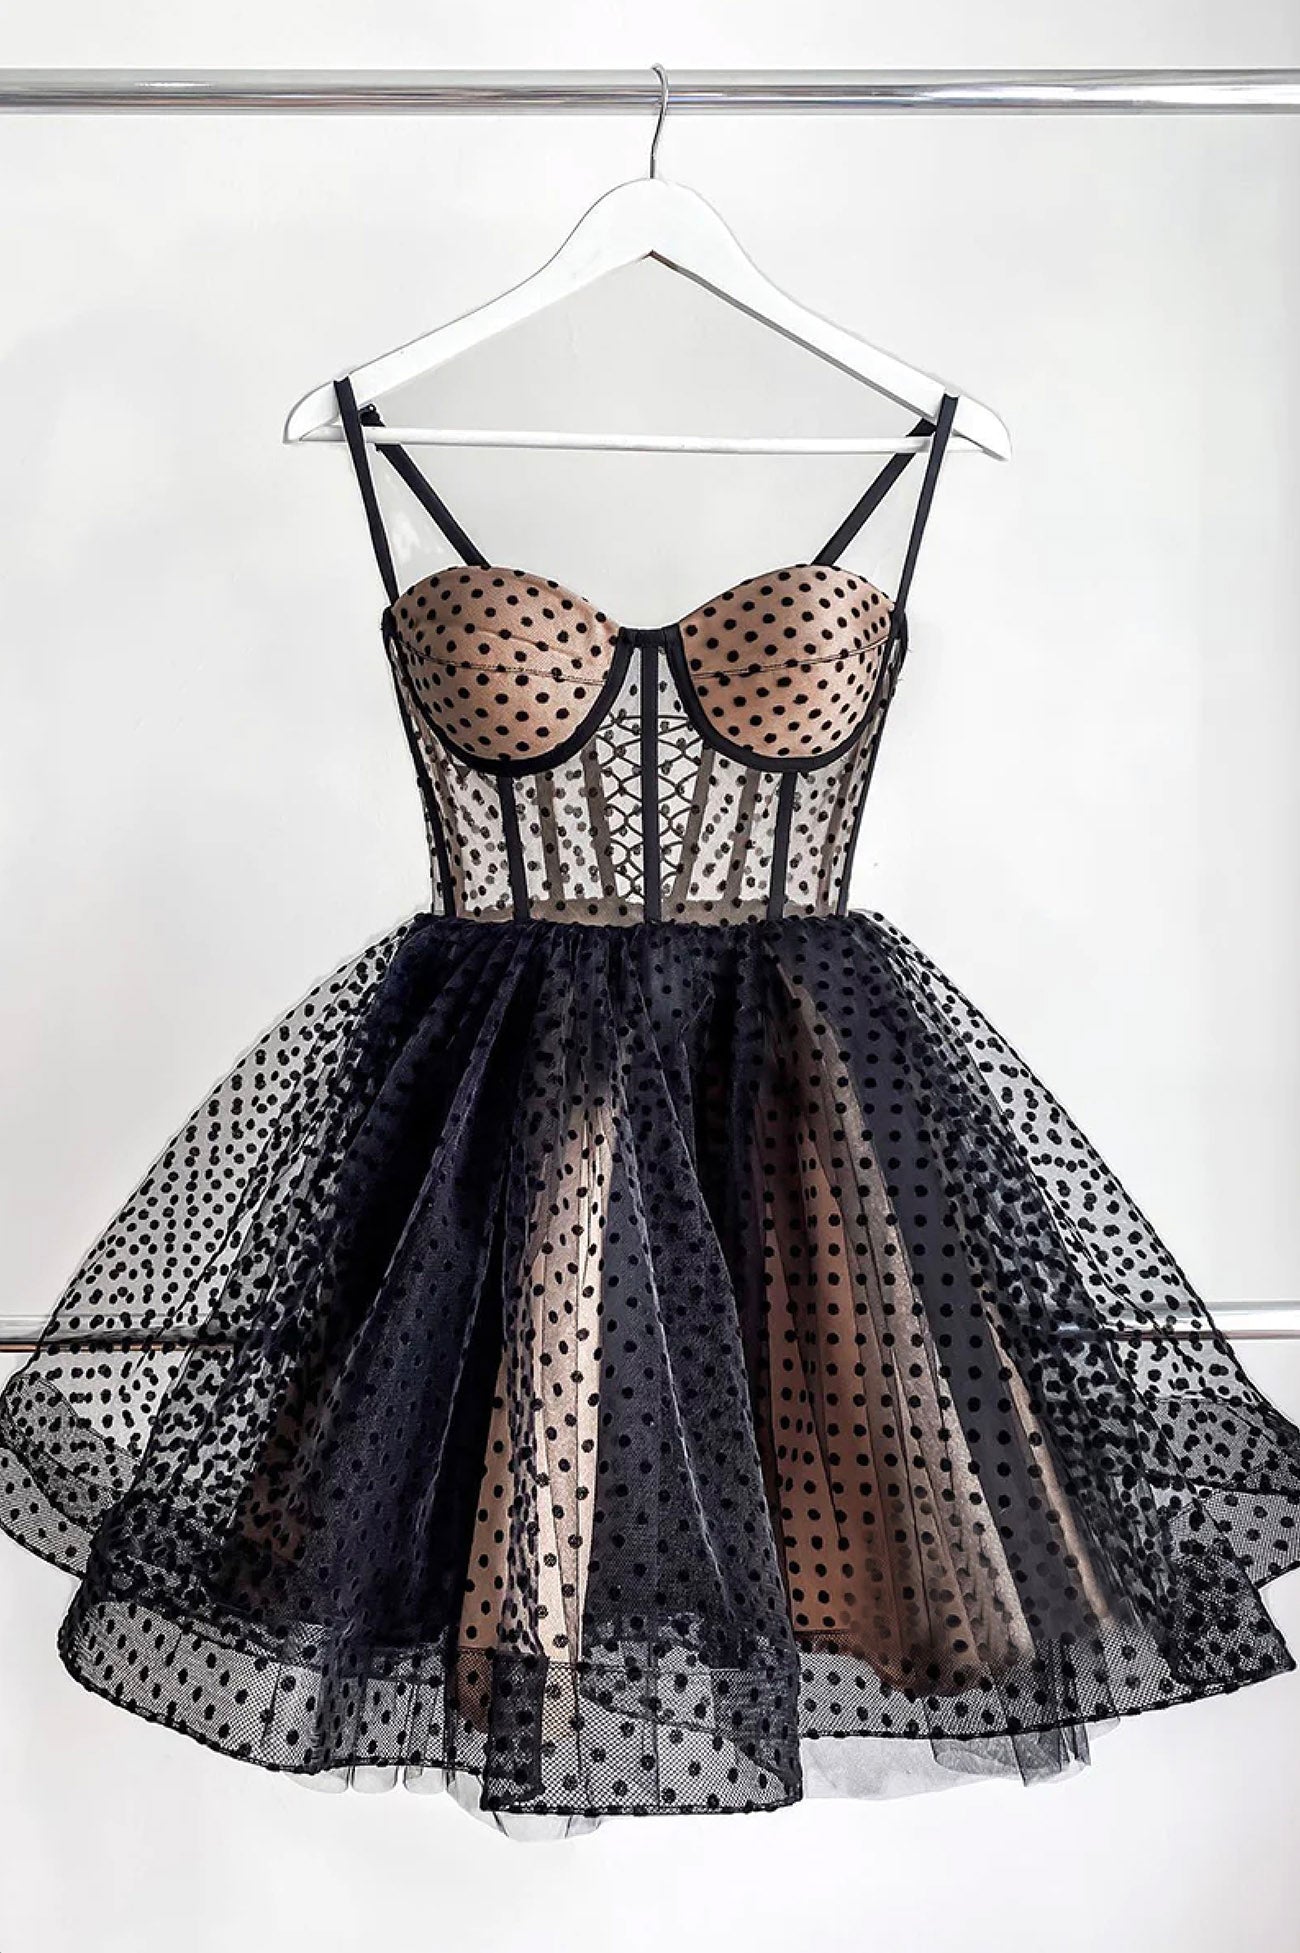 Black Tulle Spaghetti Straps Short Homecoming Dress, A-Line Evening Party Dress